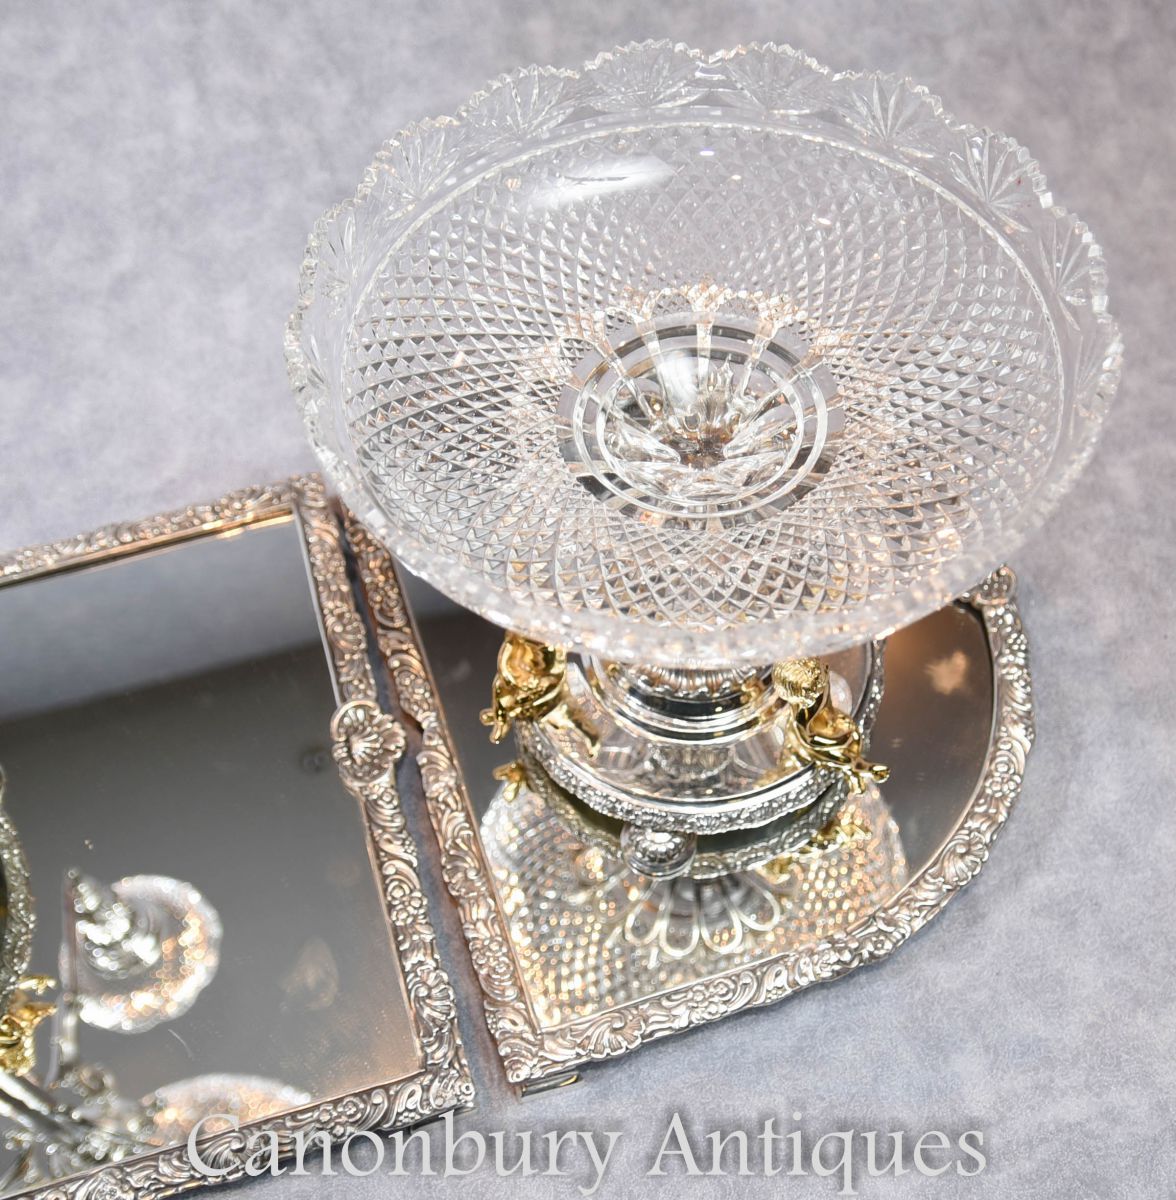 Look down into the mirrored tray so you can admire the centrepiece from all angles and lights